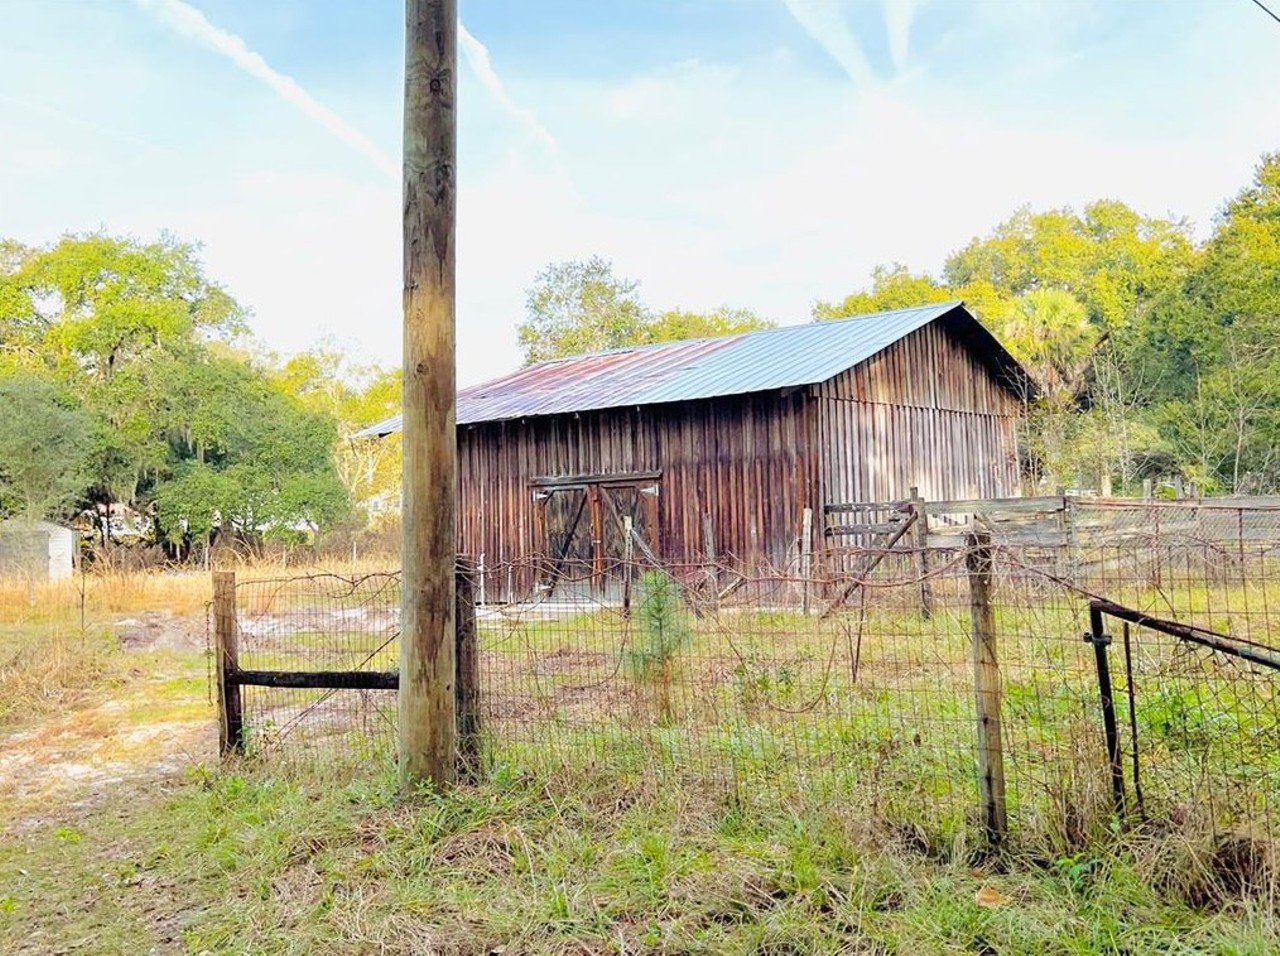 The rural dome home in Clermont is a fixer-upper on a large piece of land